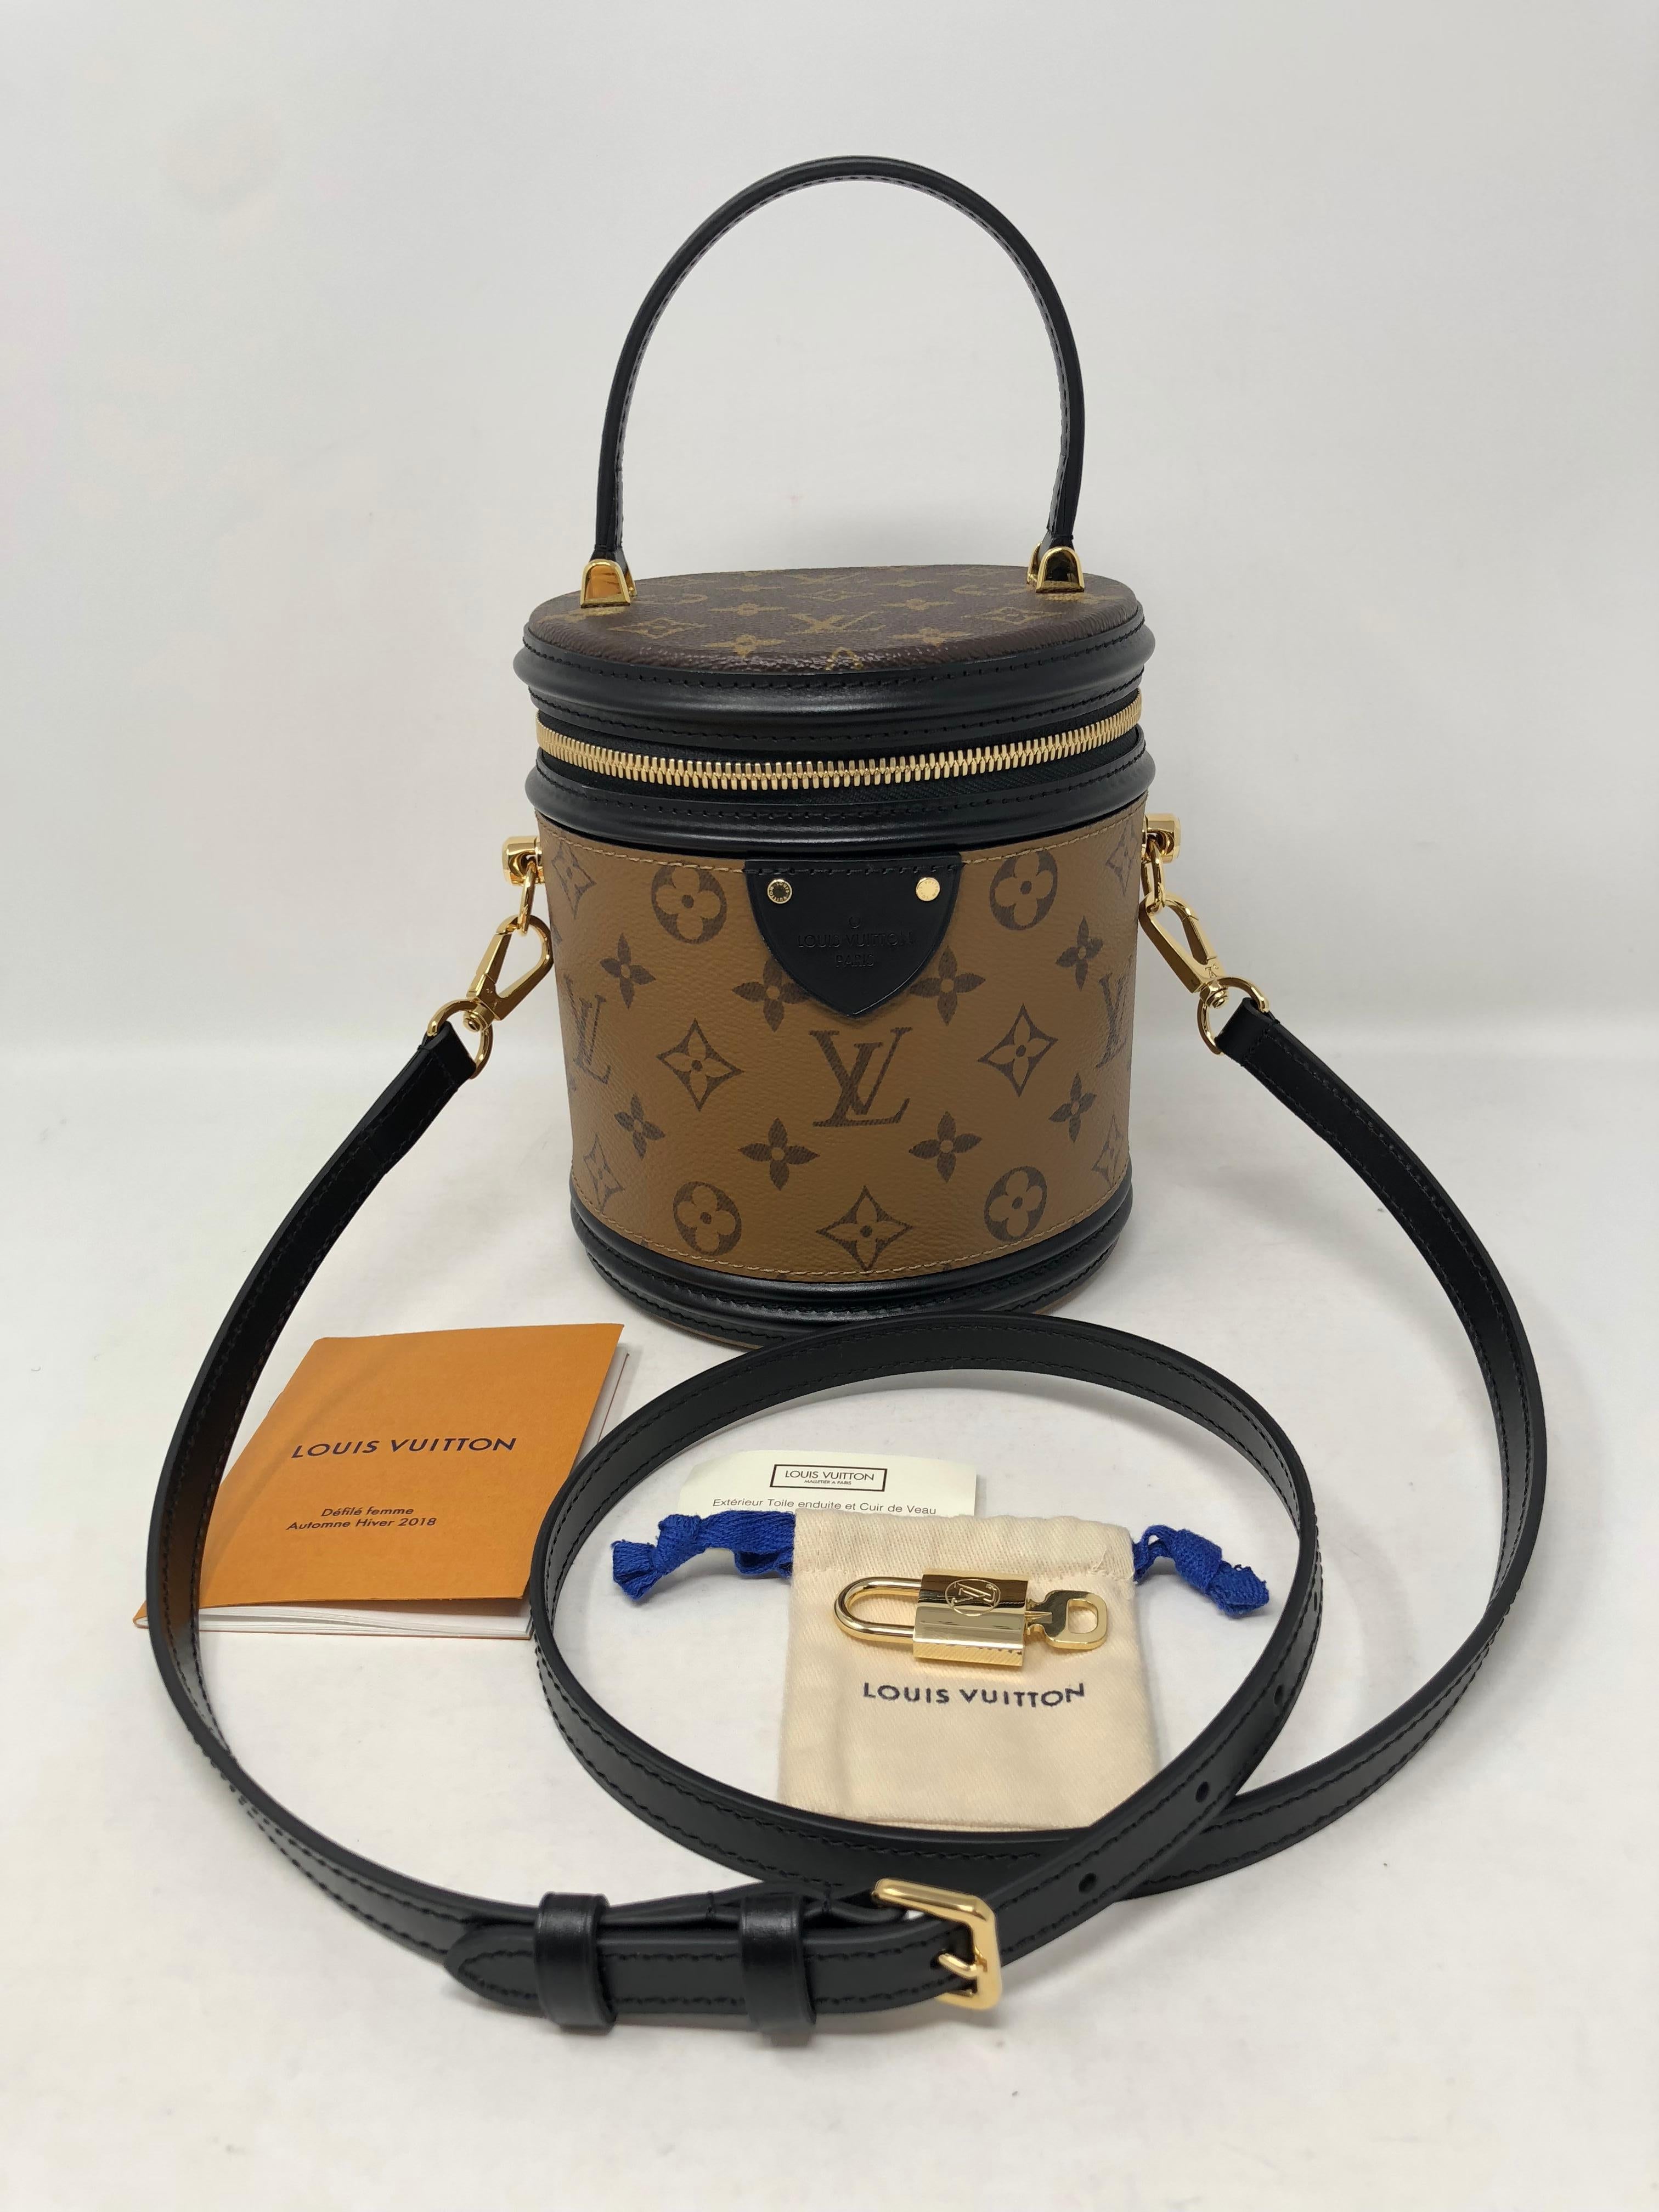 Louis Vuitton Reverse Monogram Cannes Bag. Limited and sold out. This exceptional bag is brand new and never carried. The bag features a leather top handle with black leather trim and an adjustable strap. Can be worn as a shoulder bag or carried